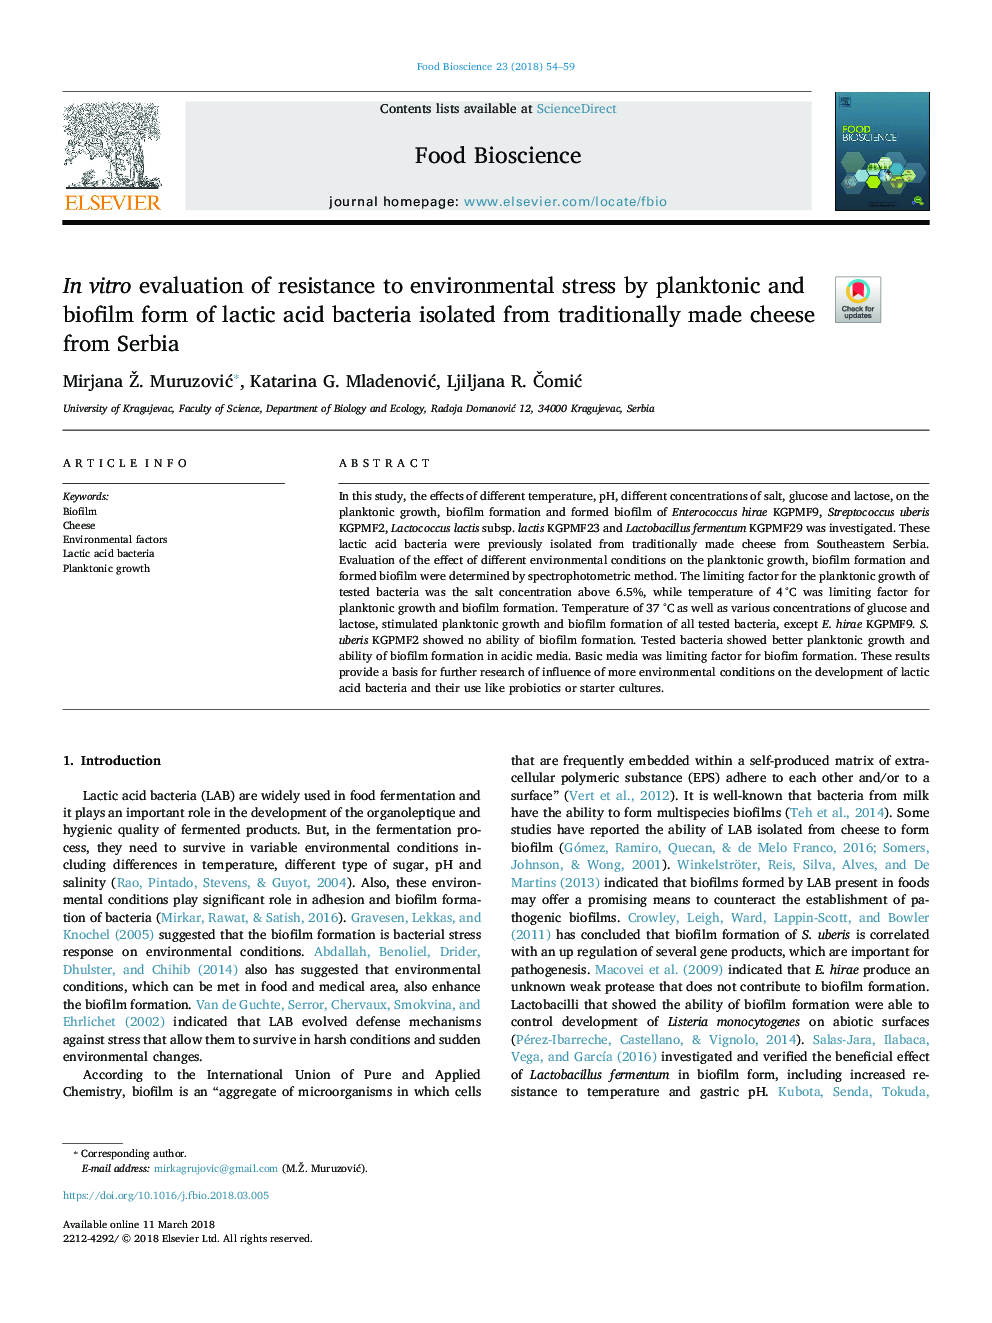 In vitro evaluation of resistance to environmental stress by planktonic and biofilm form of lactic acid bacteria isolated from traditionally made cheese from Serbia